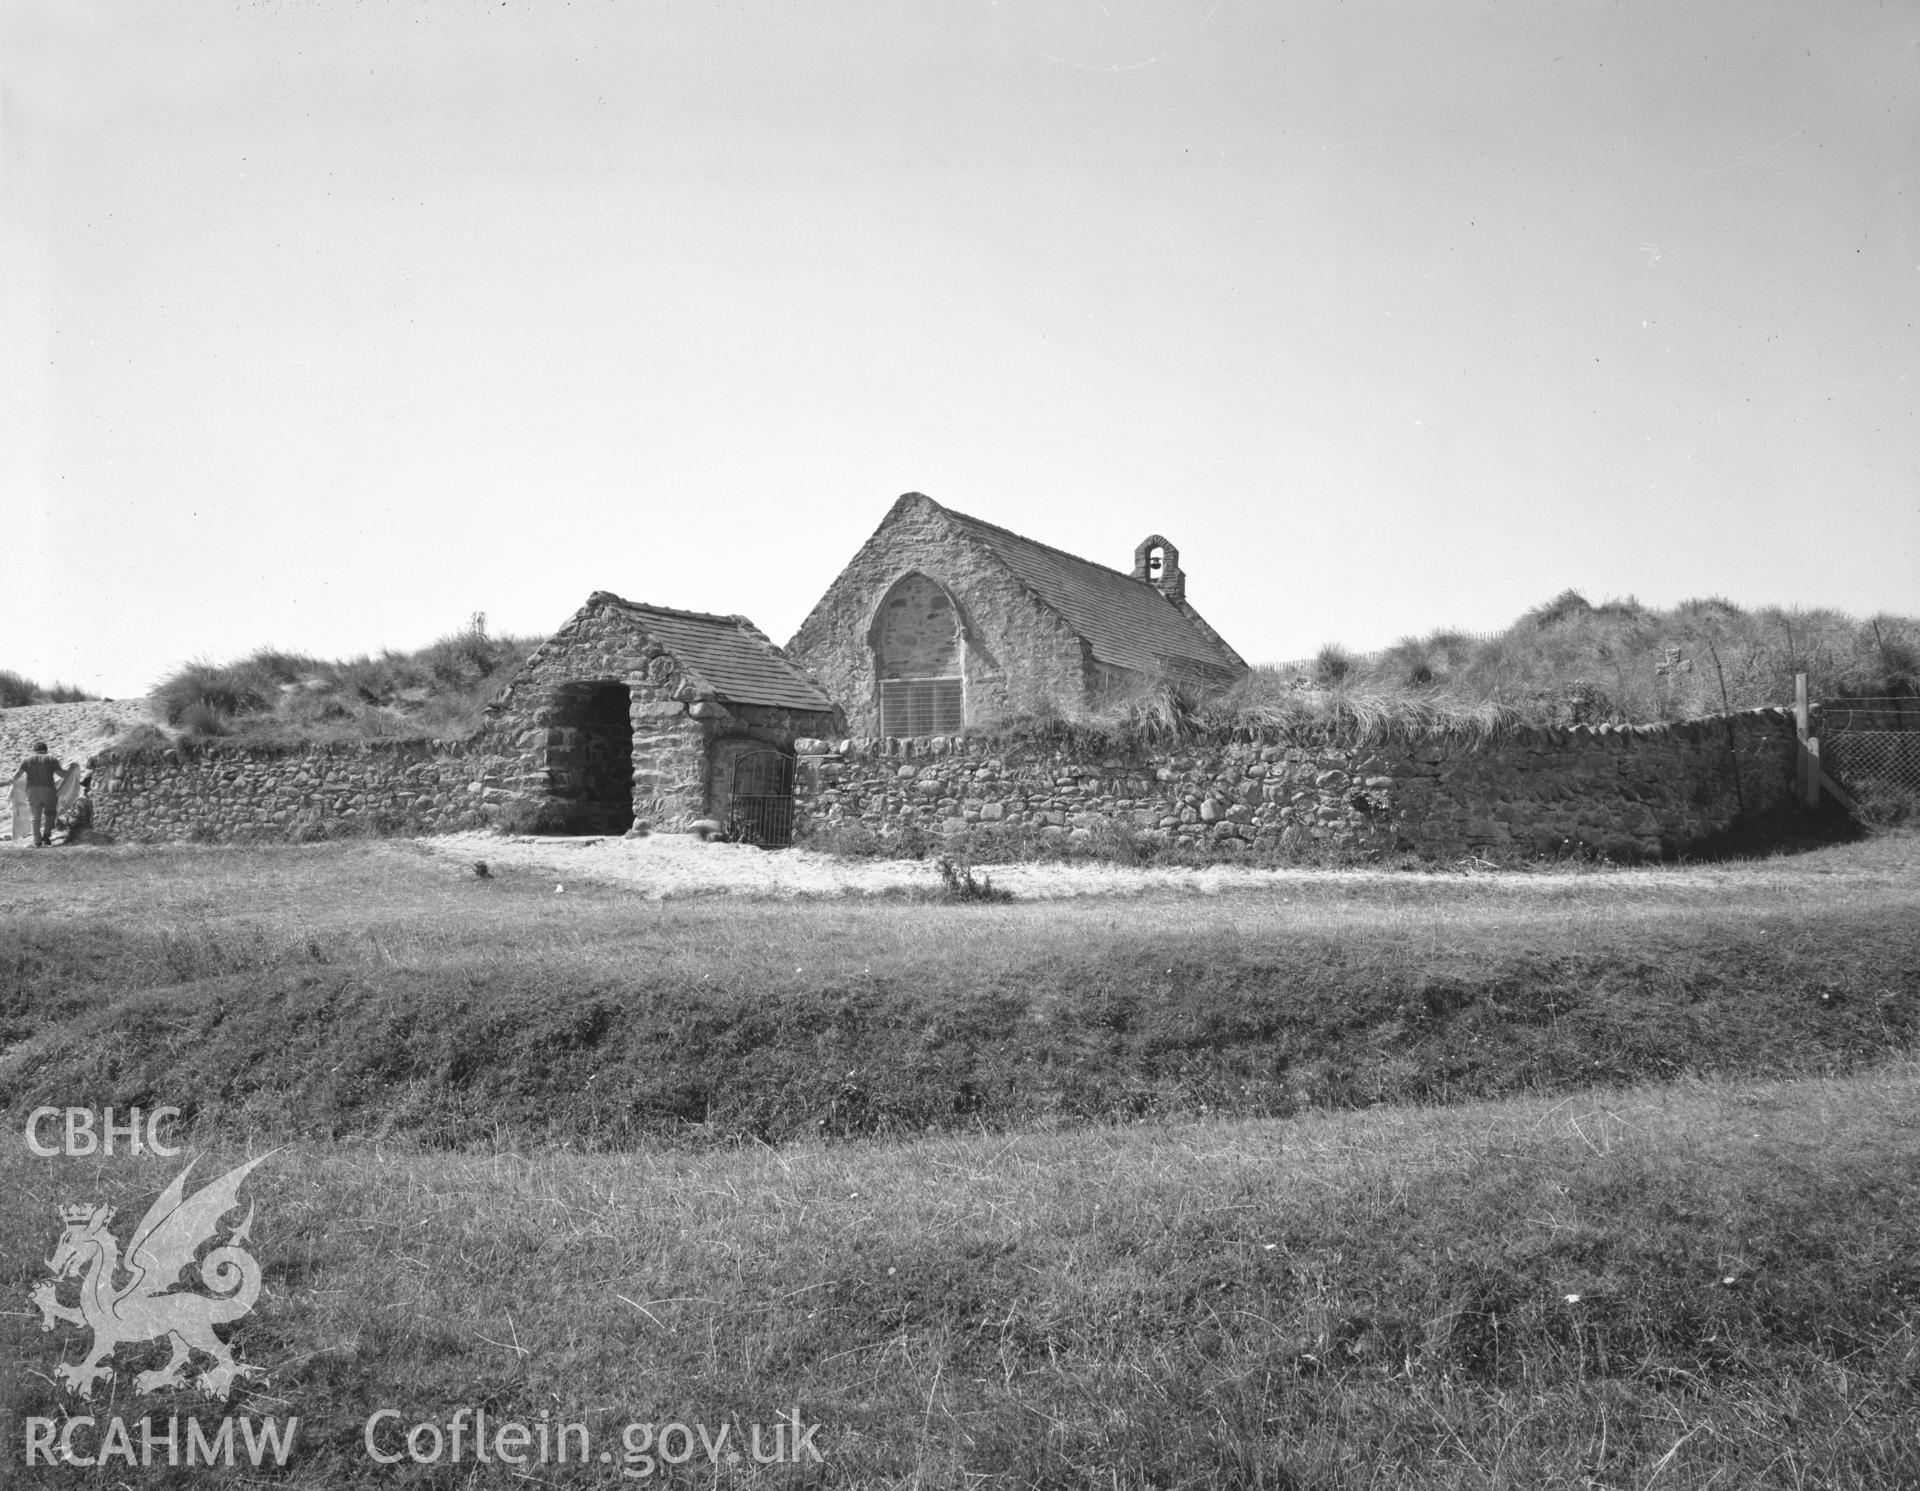 Black and white acetate negative showing exterior view of Llandanwg Church.